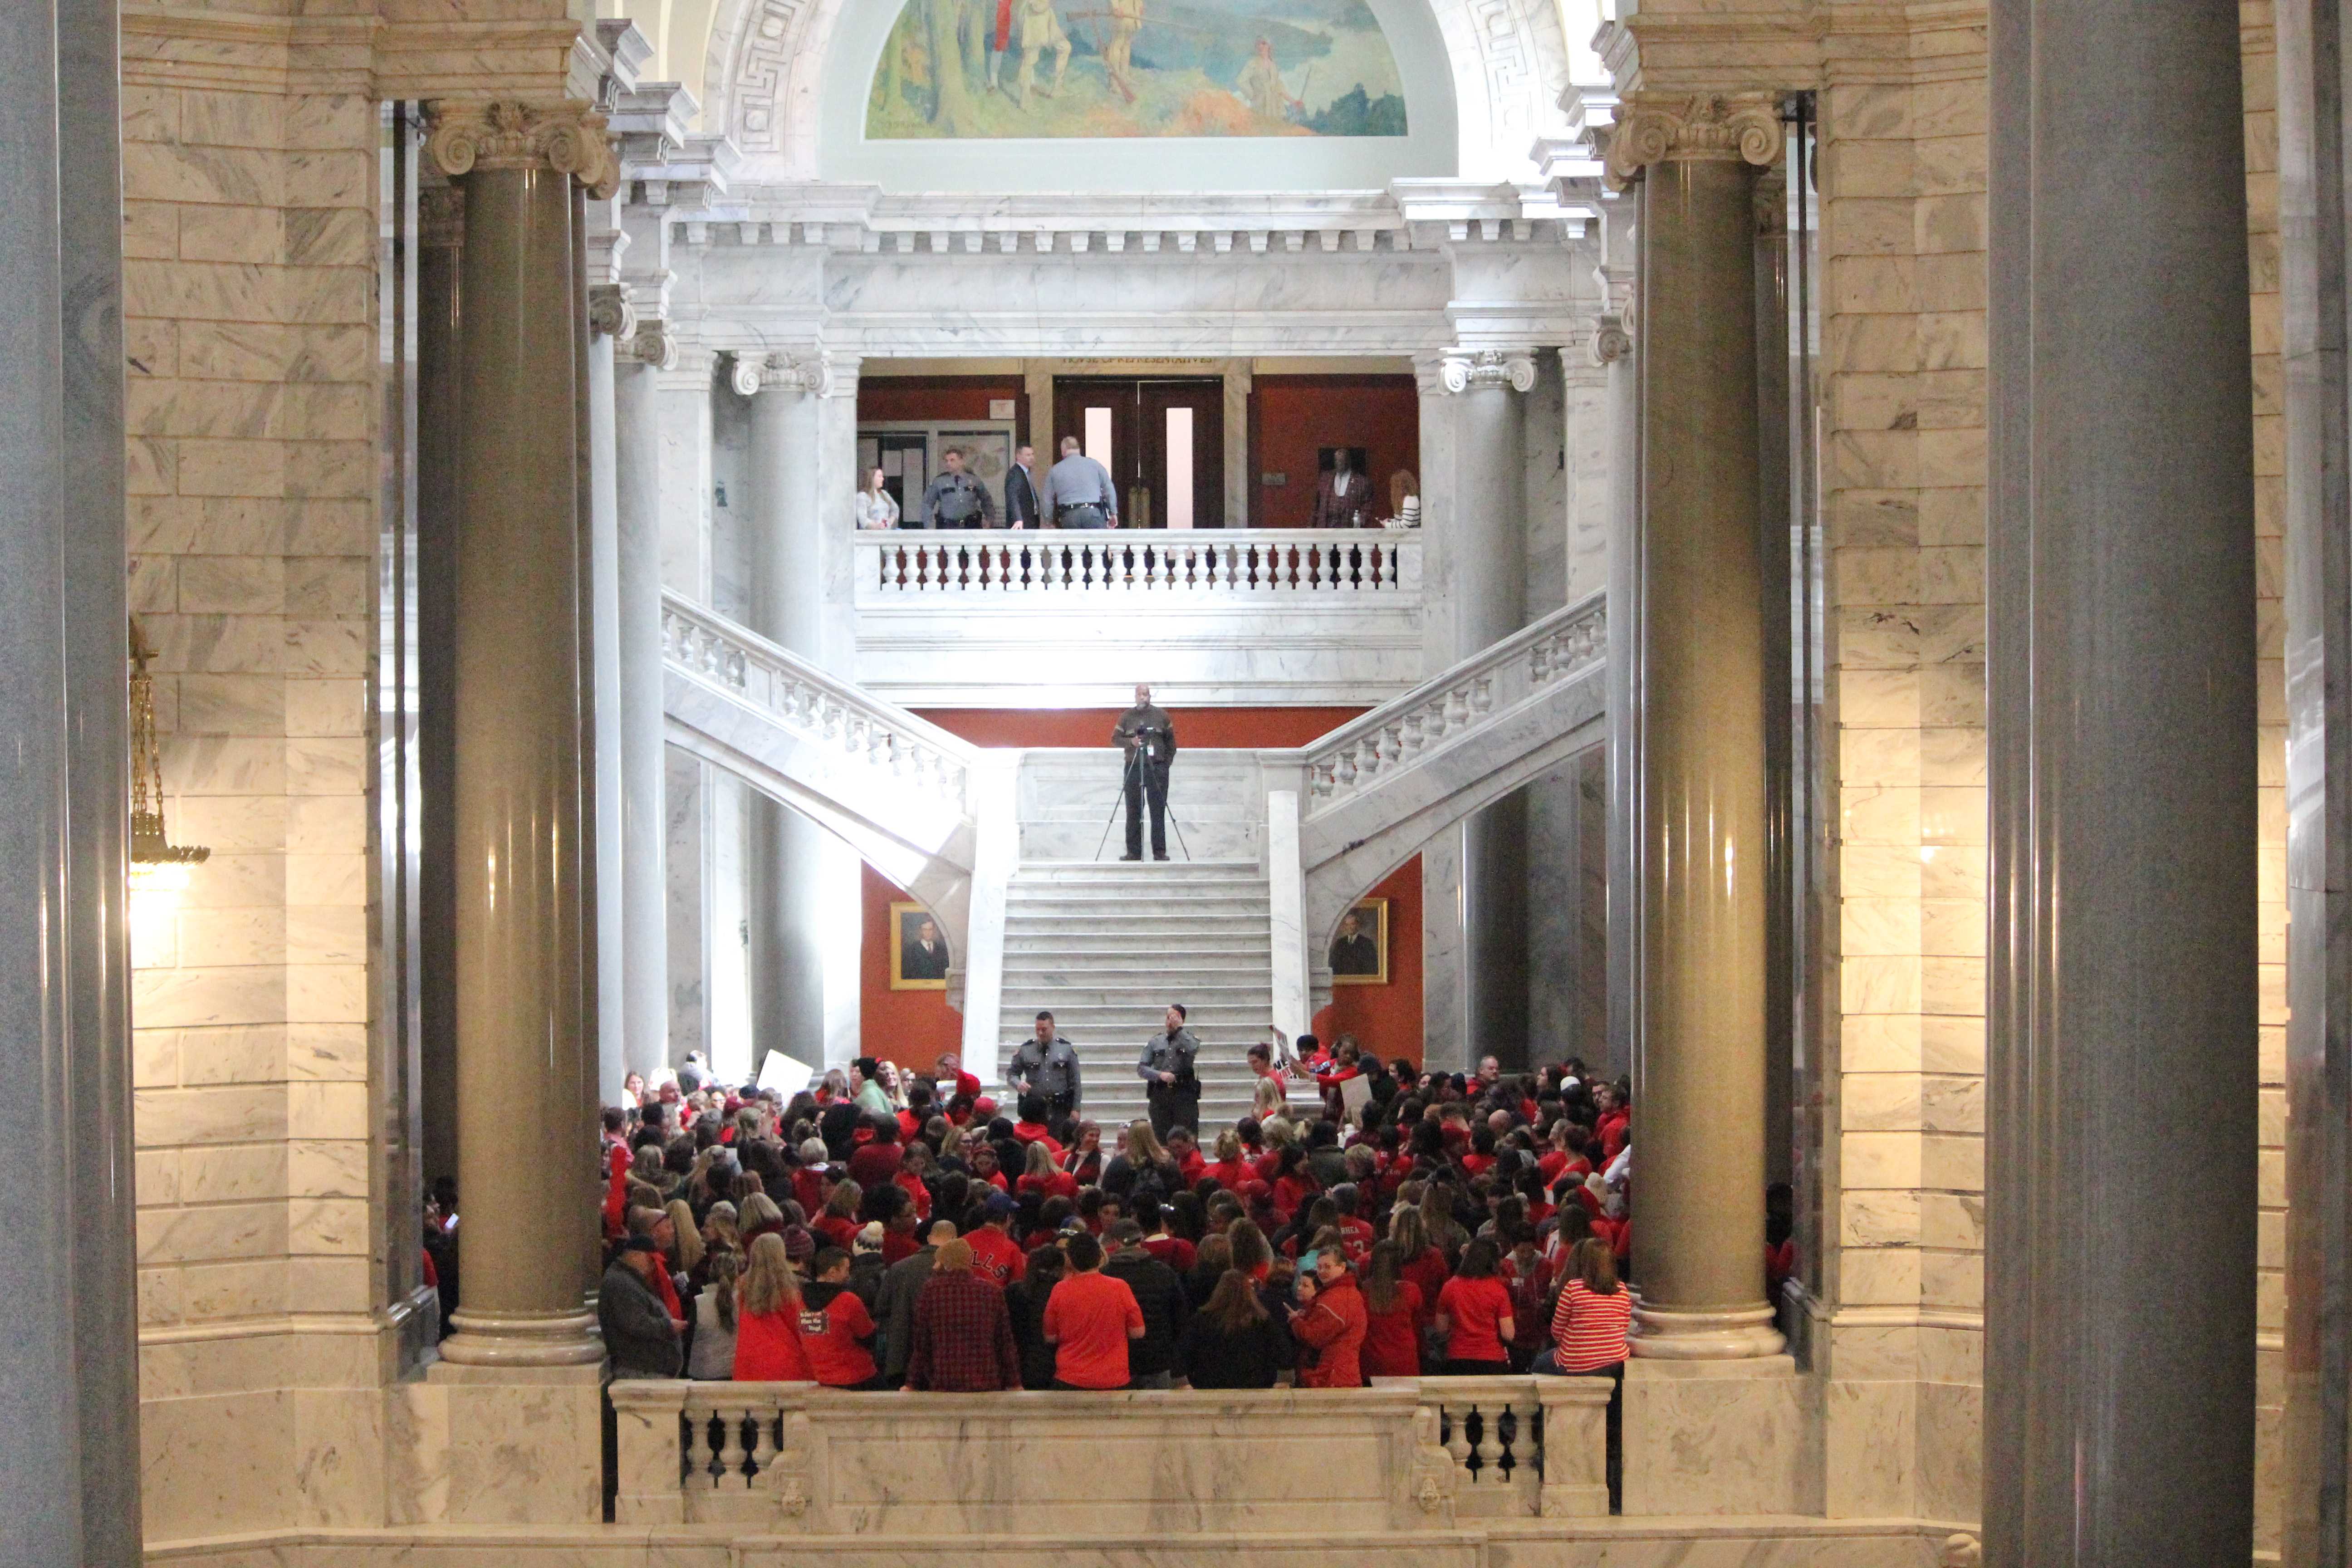 Teachers in the rotunda crowd together to sing and chant against House and Senate Bills. Photo by Emma E.P. Presnell